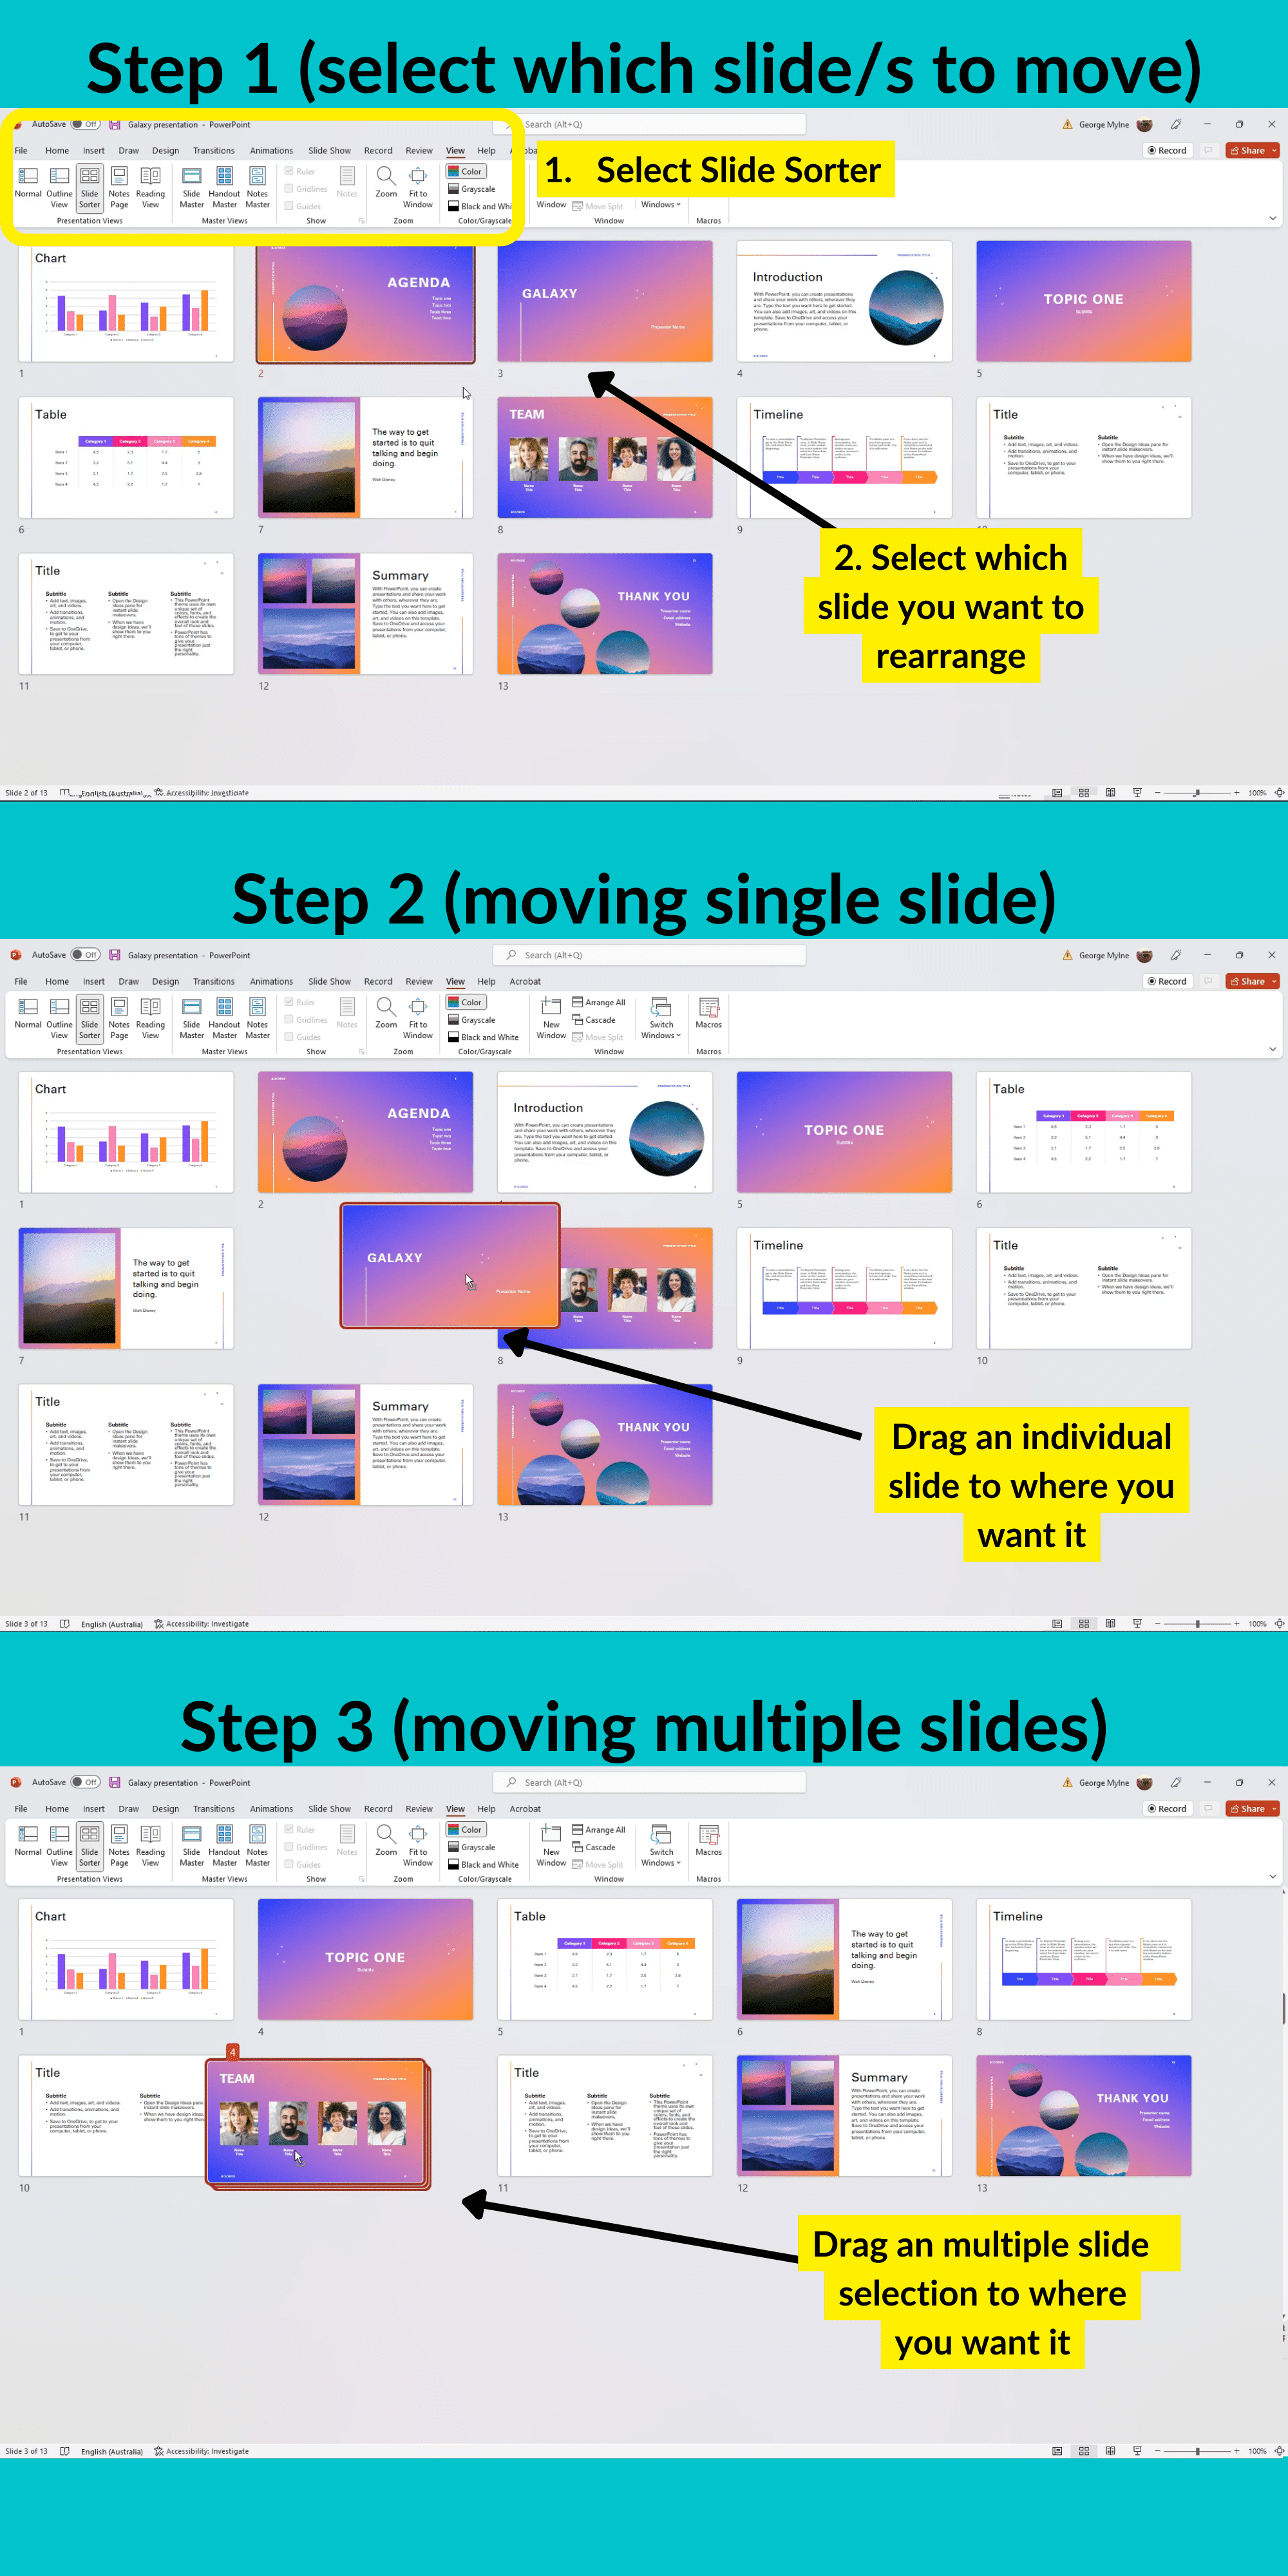 How to Rearrange Slides in PowerPoint 2